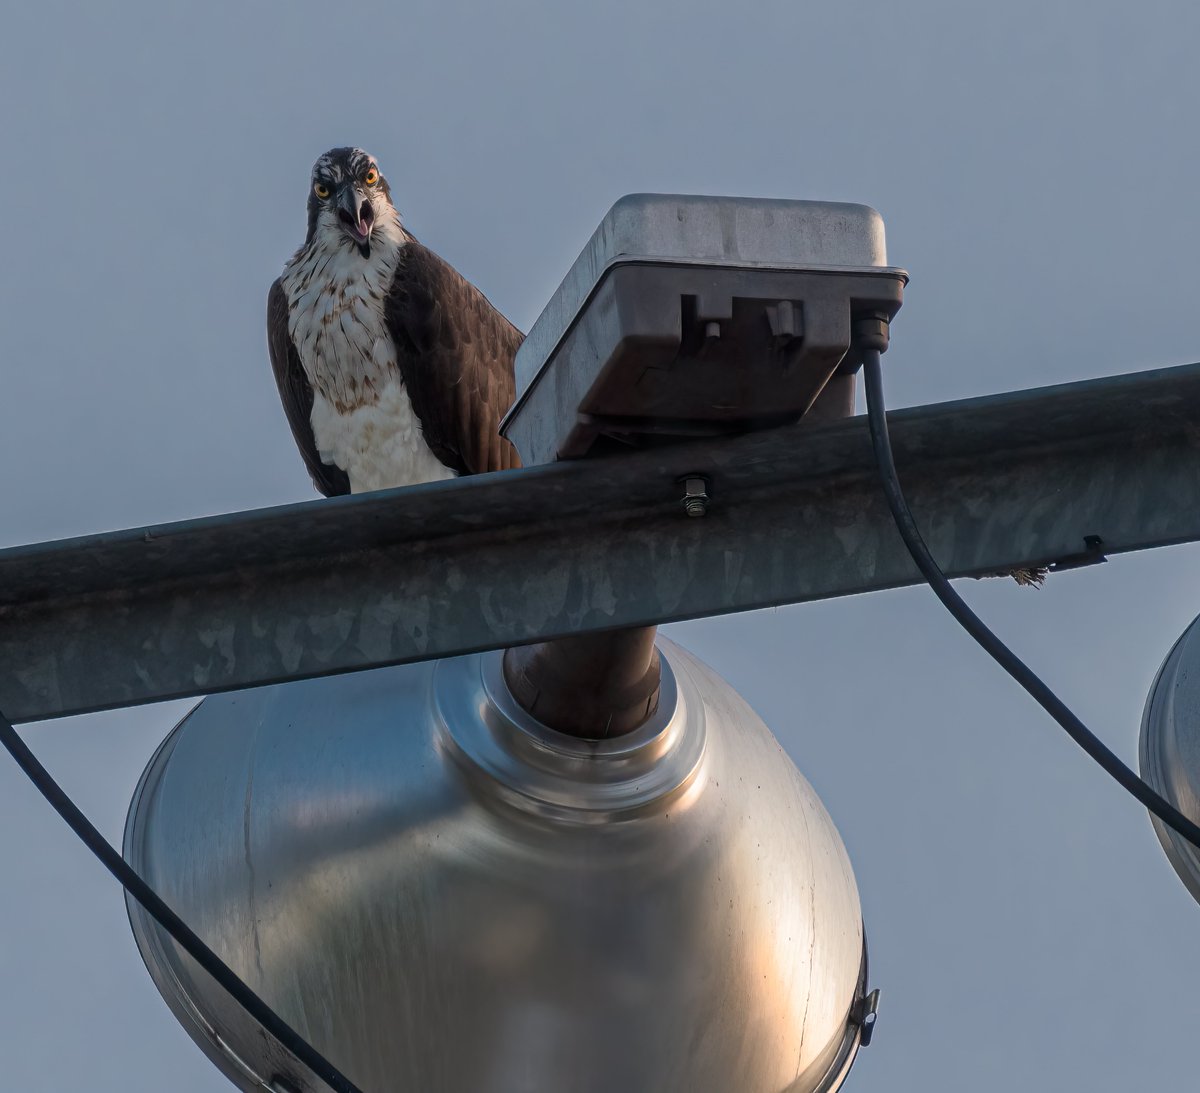 Music was blasting out from Rock the Park, last night, and that meant a quiet night, bird-wise, at The Coves. One osprey appeared to be a Garbage (the band) fan as it stuck around for the whole show. #ldnont